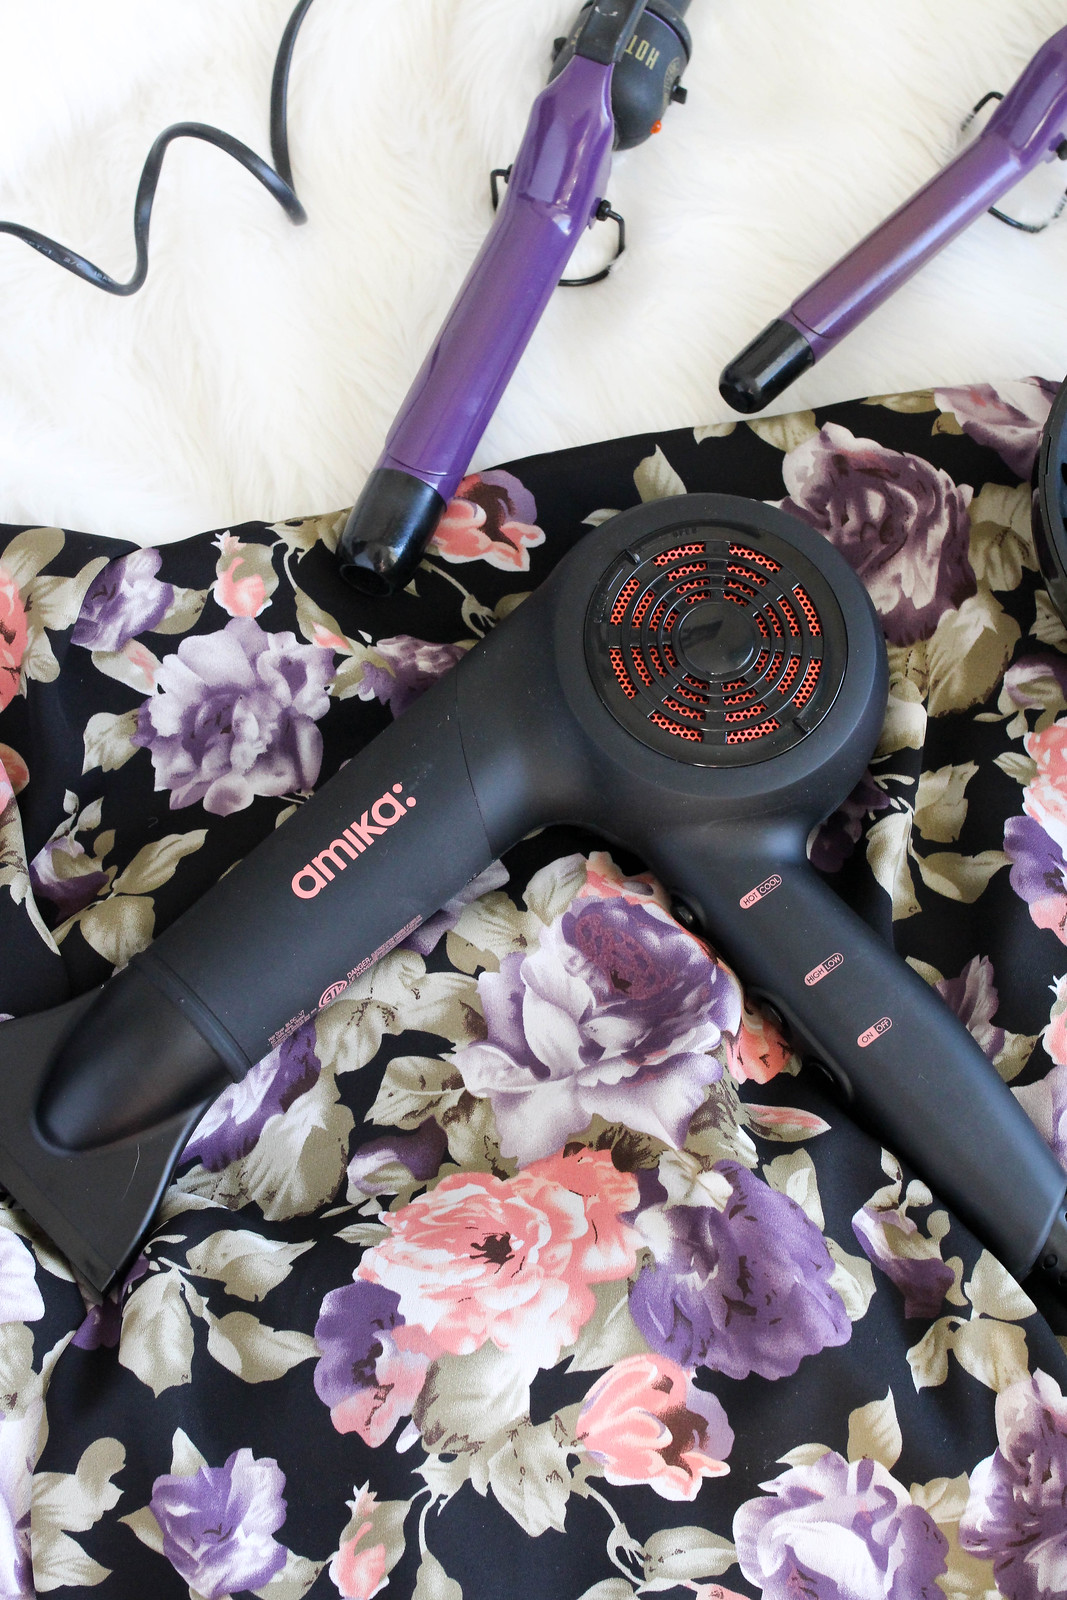 Amika The Immortal Power Life Dryer Hot Tools Curling Irons My Favorite Beauty Products of All Time Living After Midnite Jackie Giardina Beauty Blogger